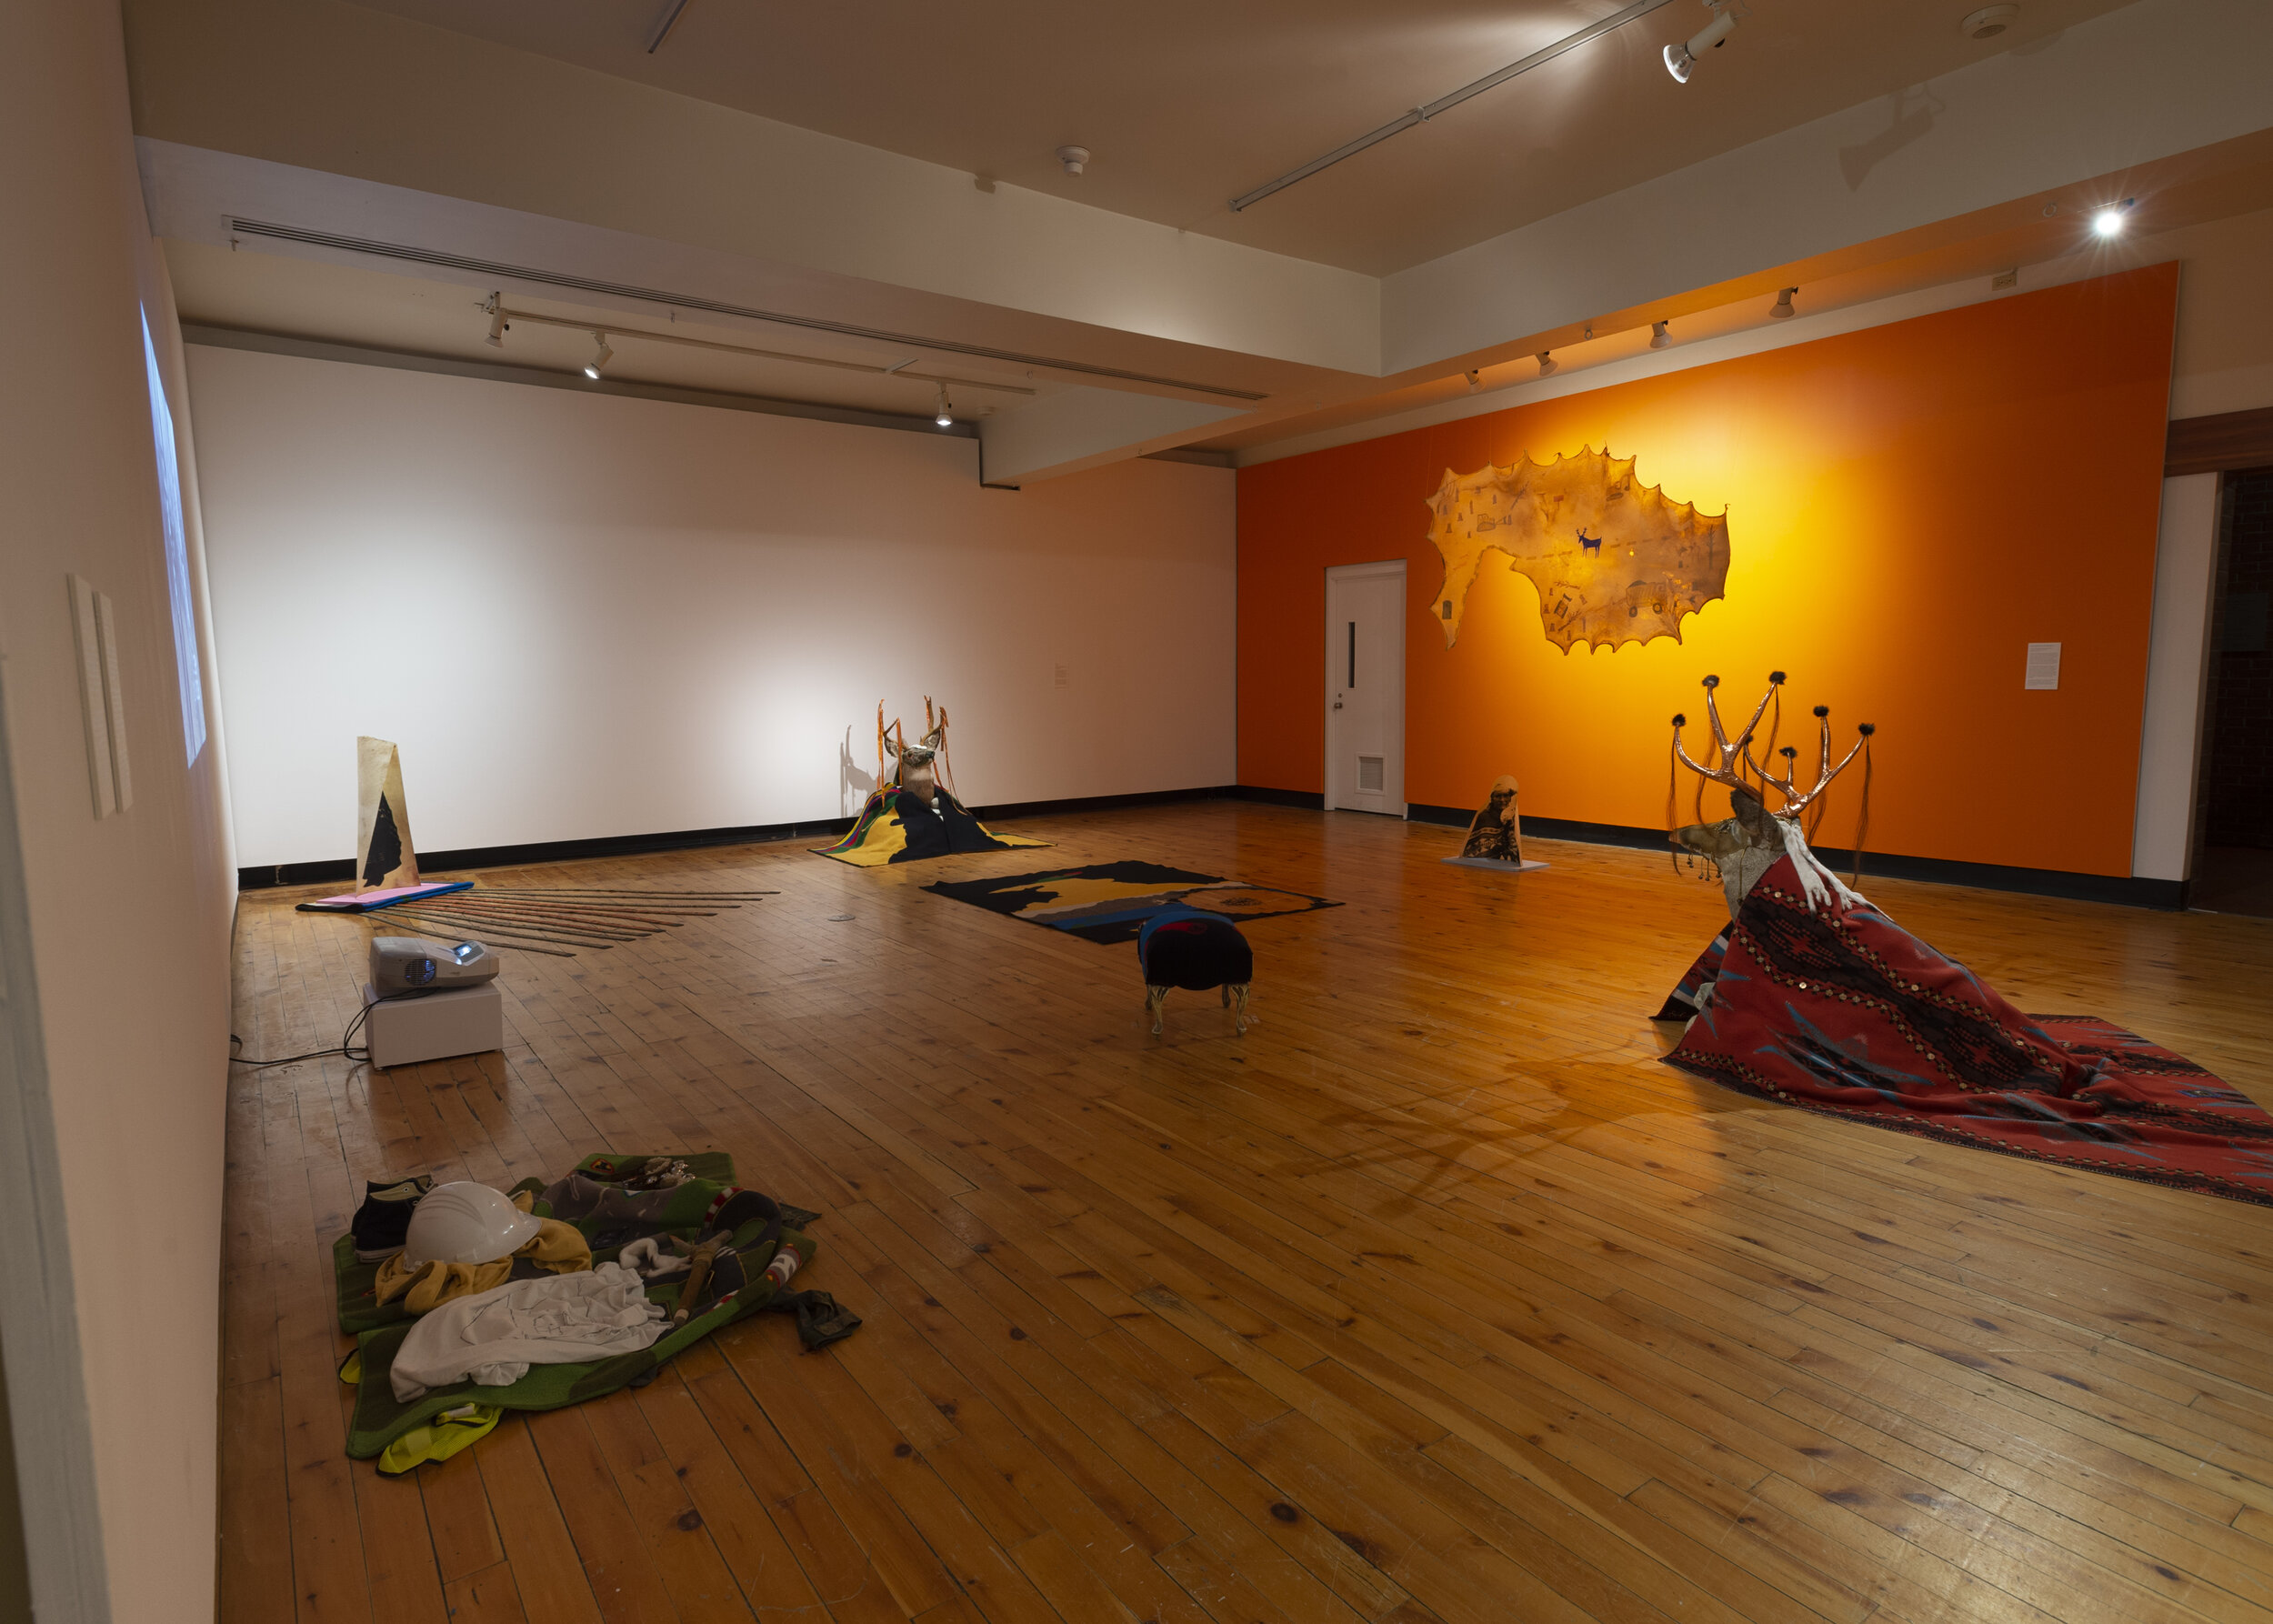 Installation view of Tina Guyani | Deer Road. Image courtesy of the Art Gallery of Guelph.